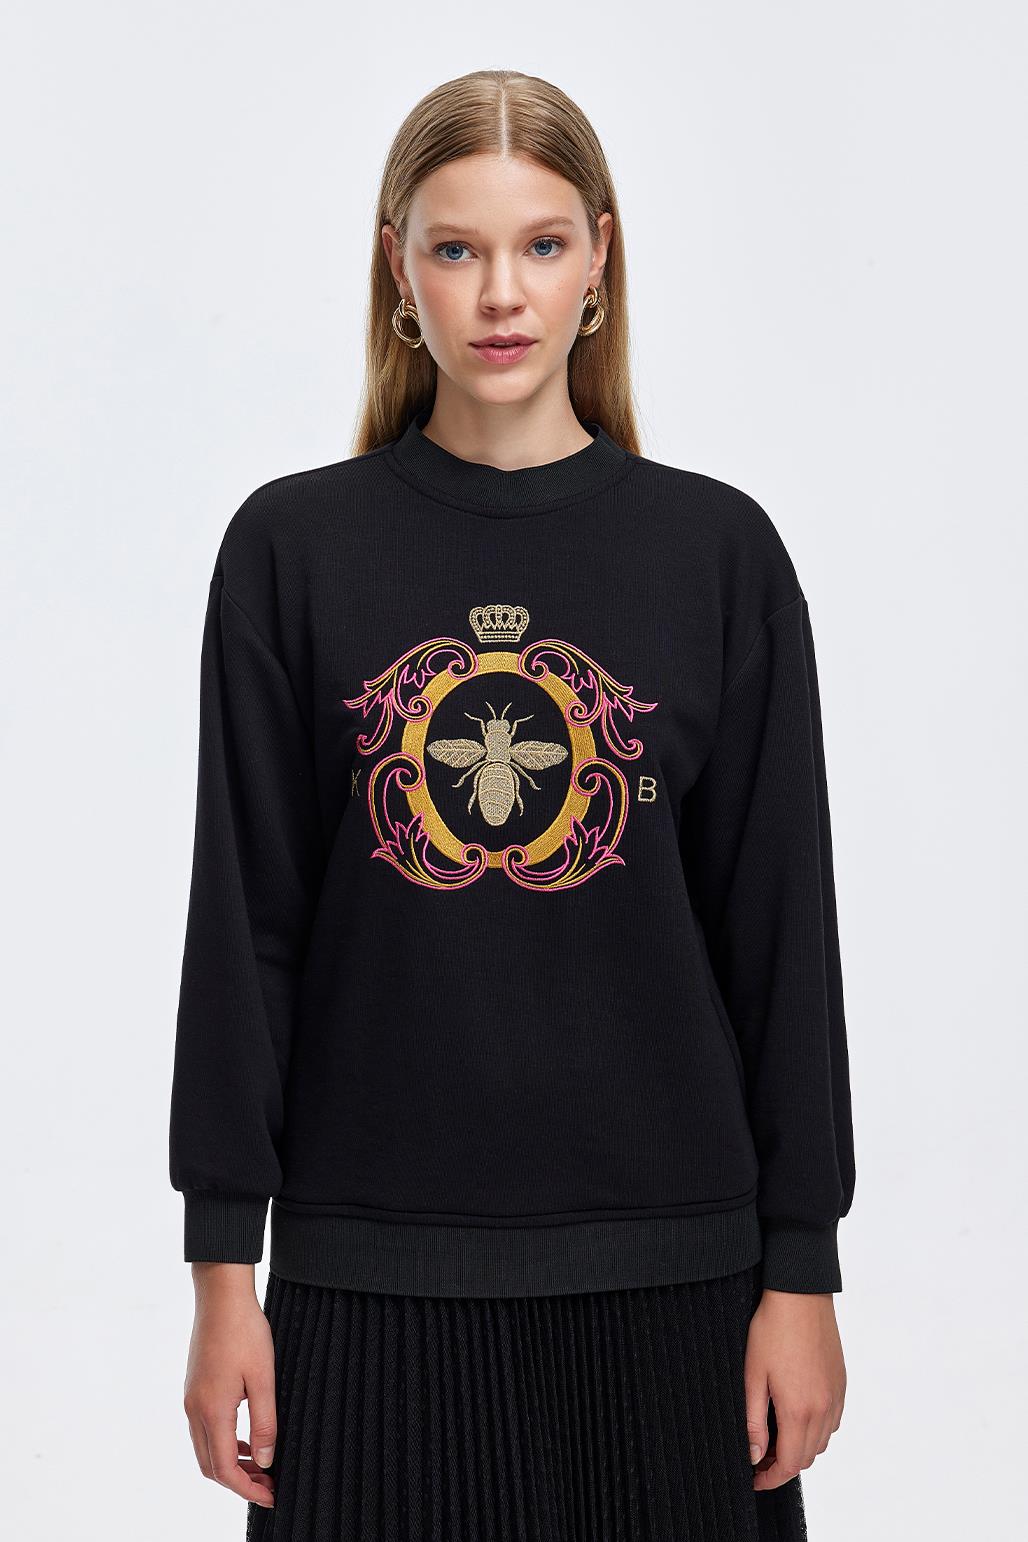 Gold Embroidered Hooded Sweatshirt Black